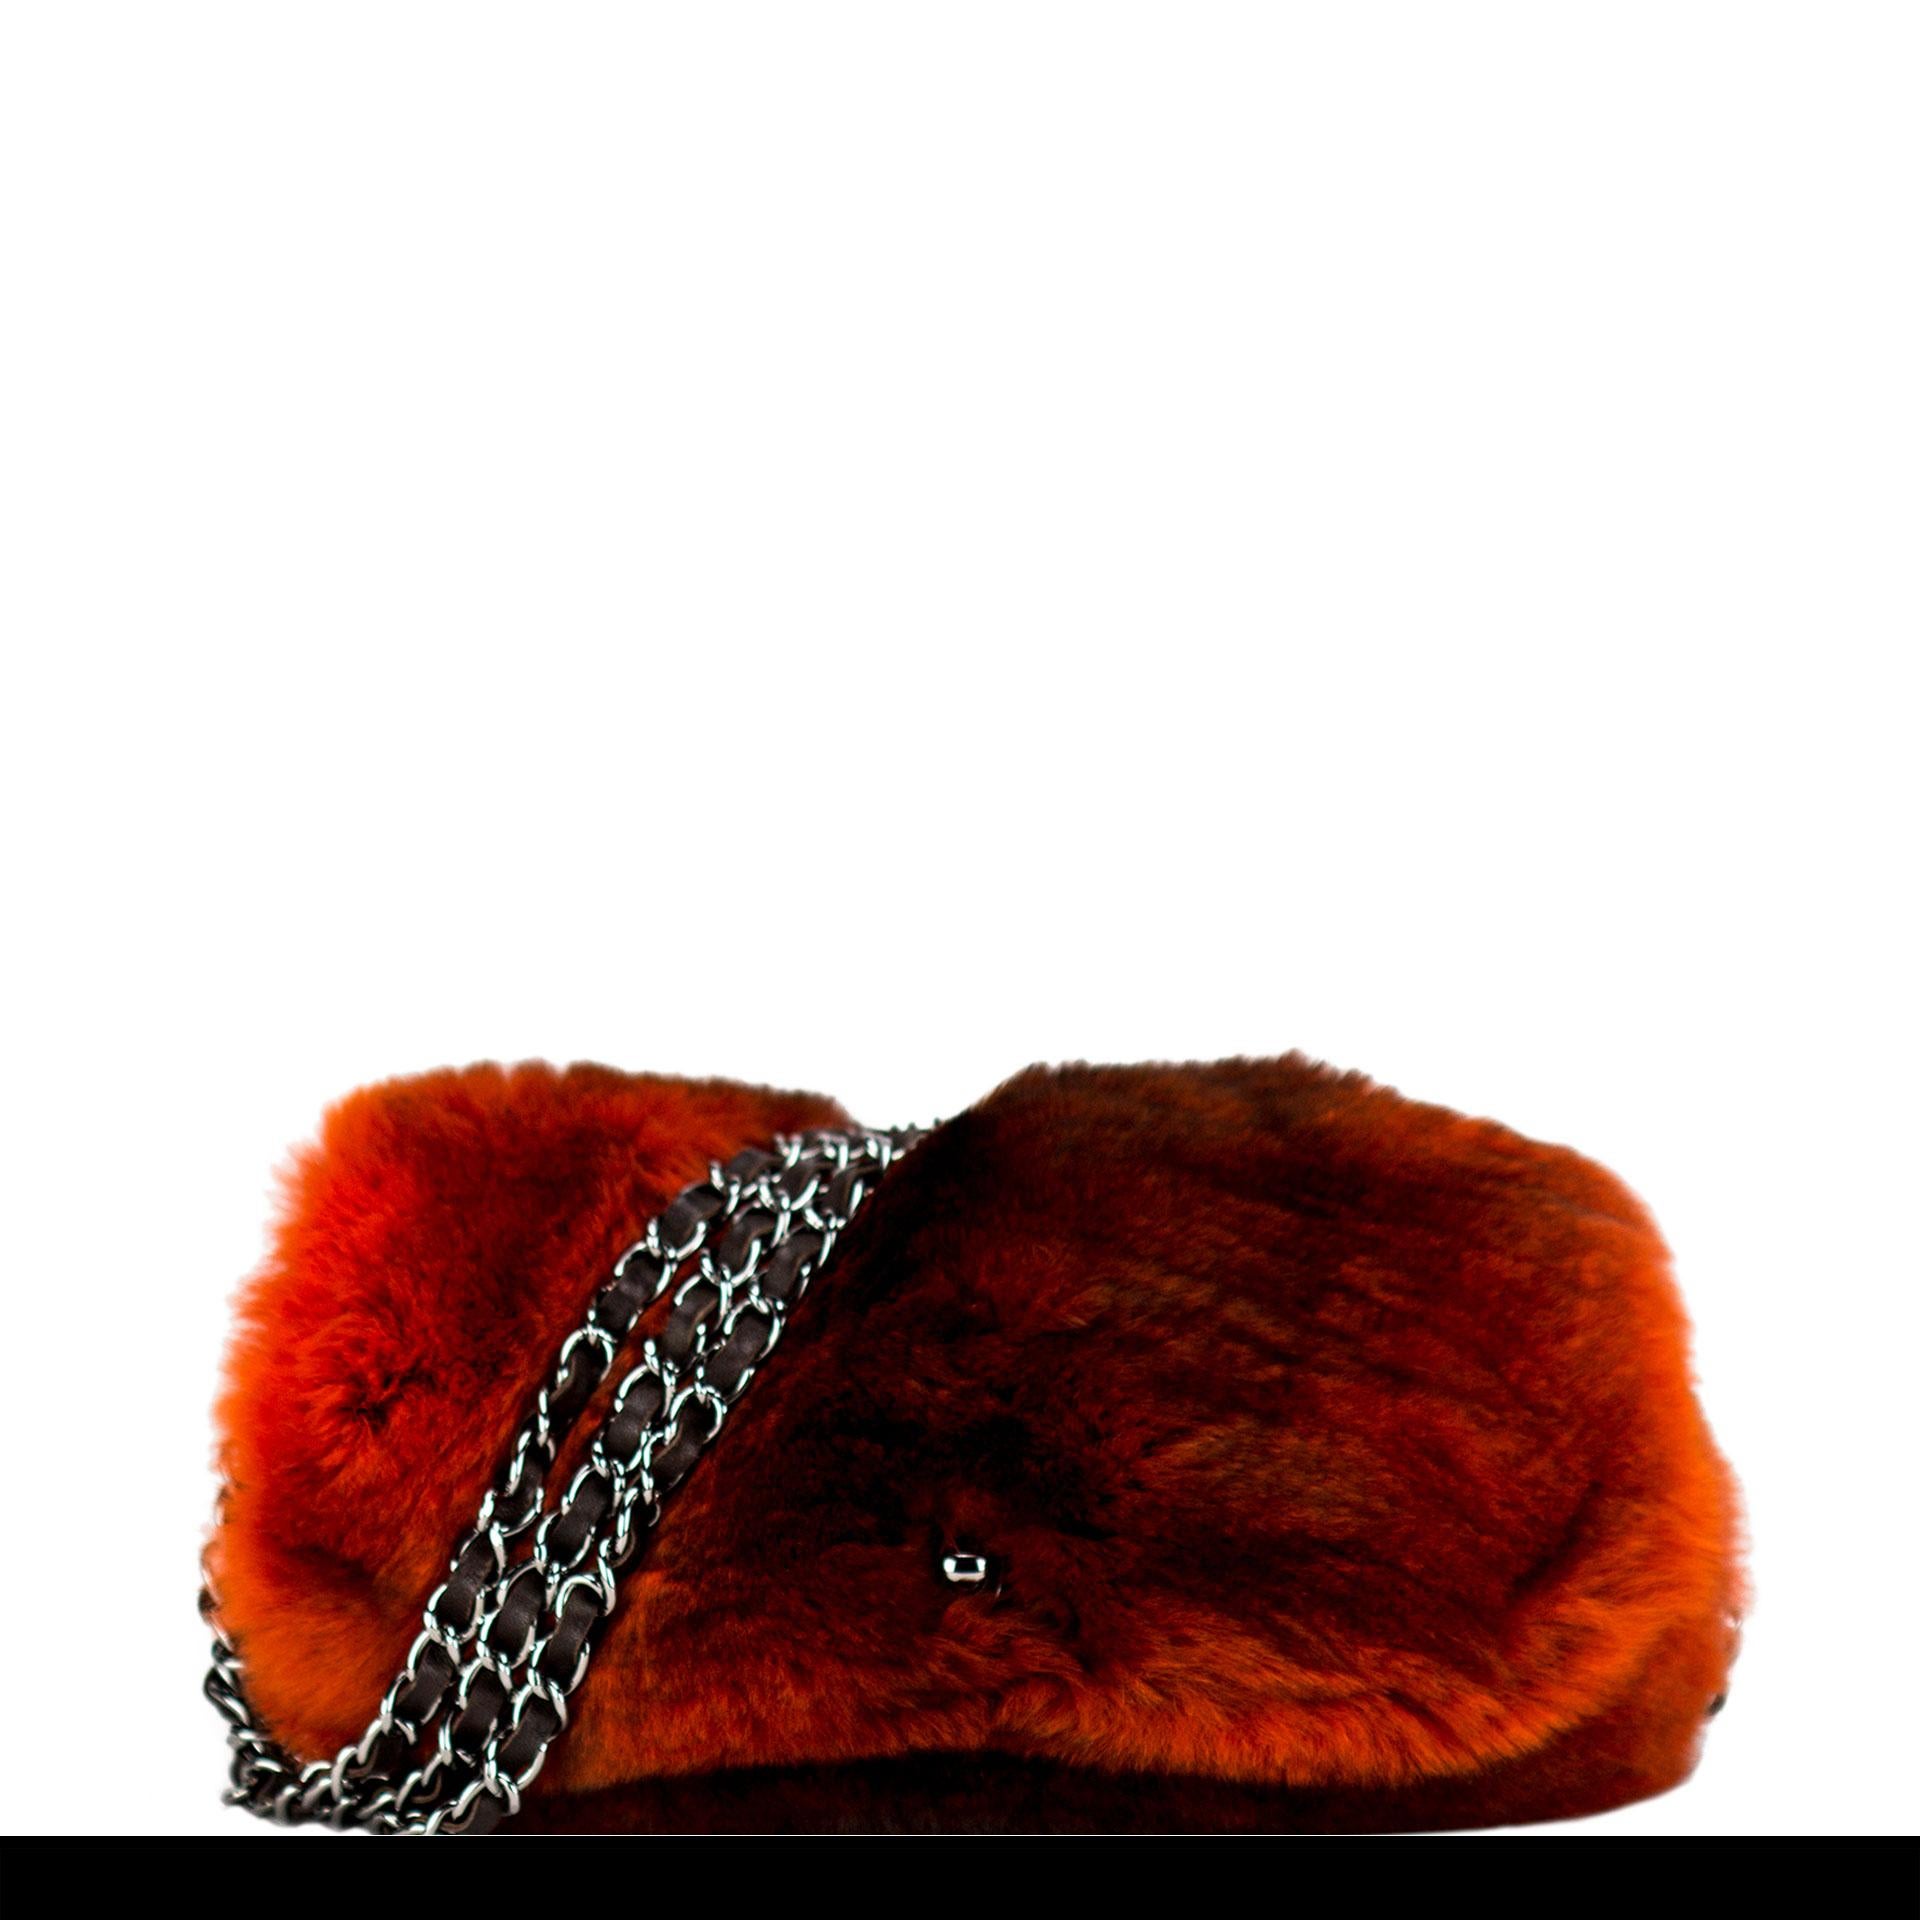 Chanel Ombre Chanel fur triple interwoven chain flap with classic cc Turnlock closure

Year: 2014
Silver hardware
Interior brown lambskin lining
Interior brown graffiti lining
Strap drop 10”
6” H x 10” W x 3” D

Made in France